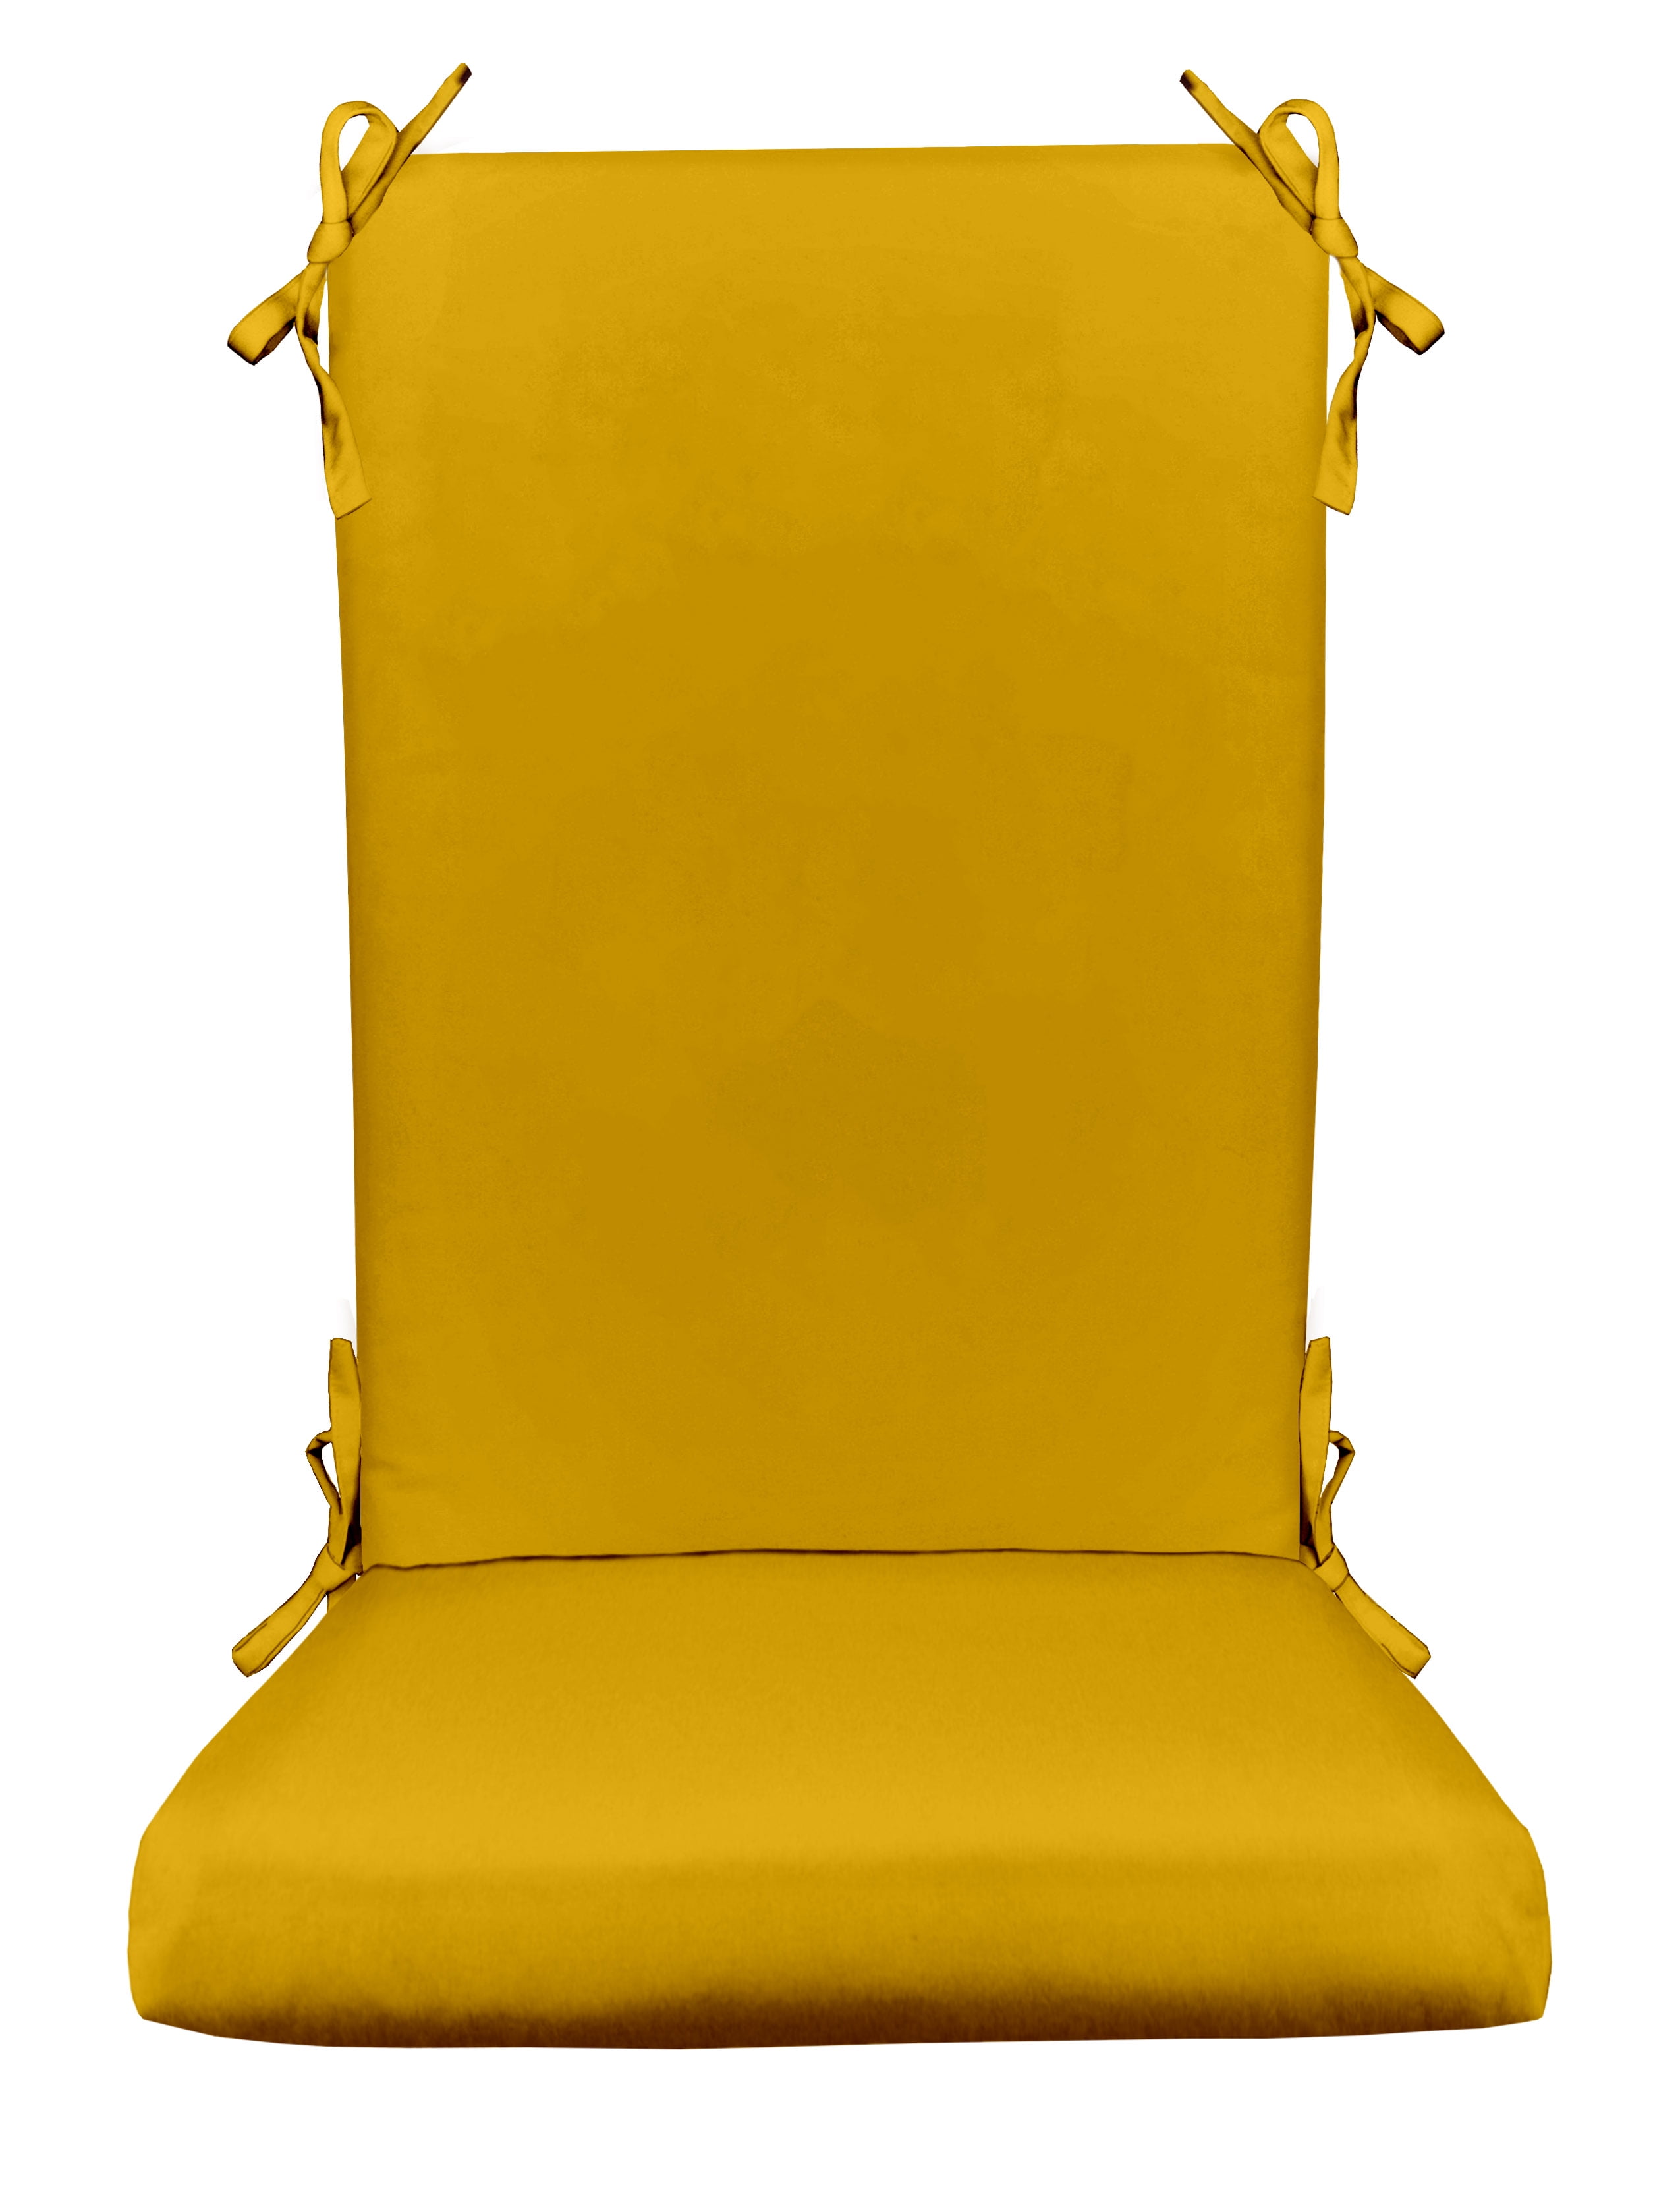 Rsh Décor Indoor Outdoor Foam Rocker, Yellow Outdoor Cushions For Rocking Chairs